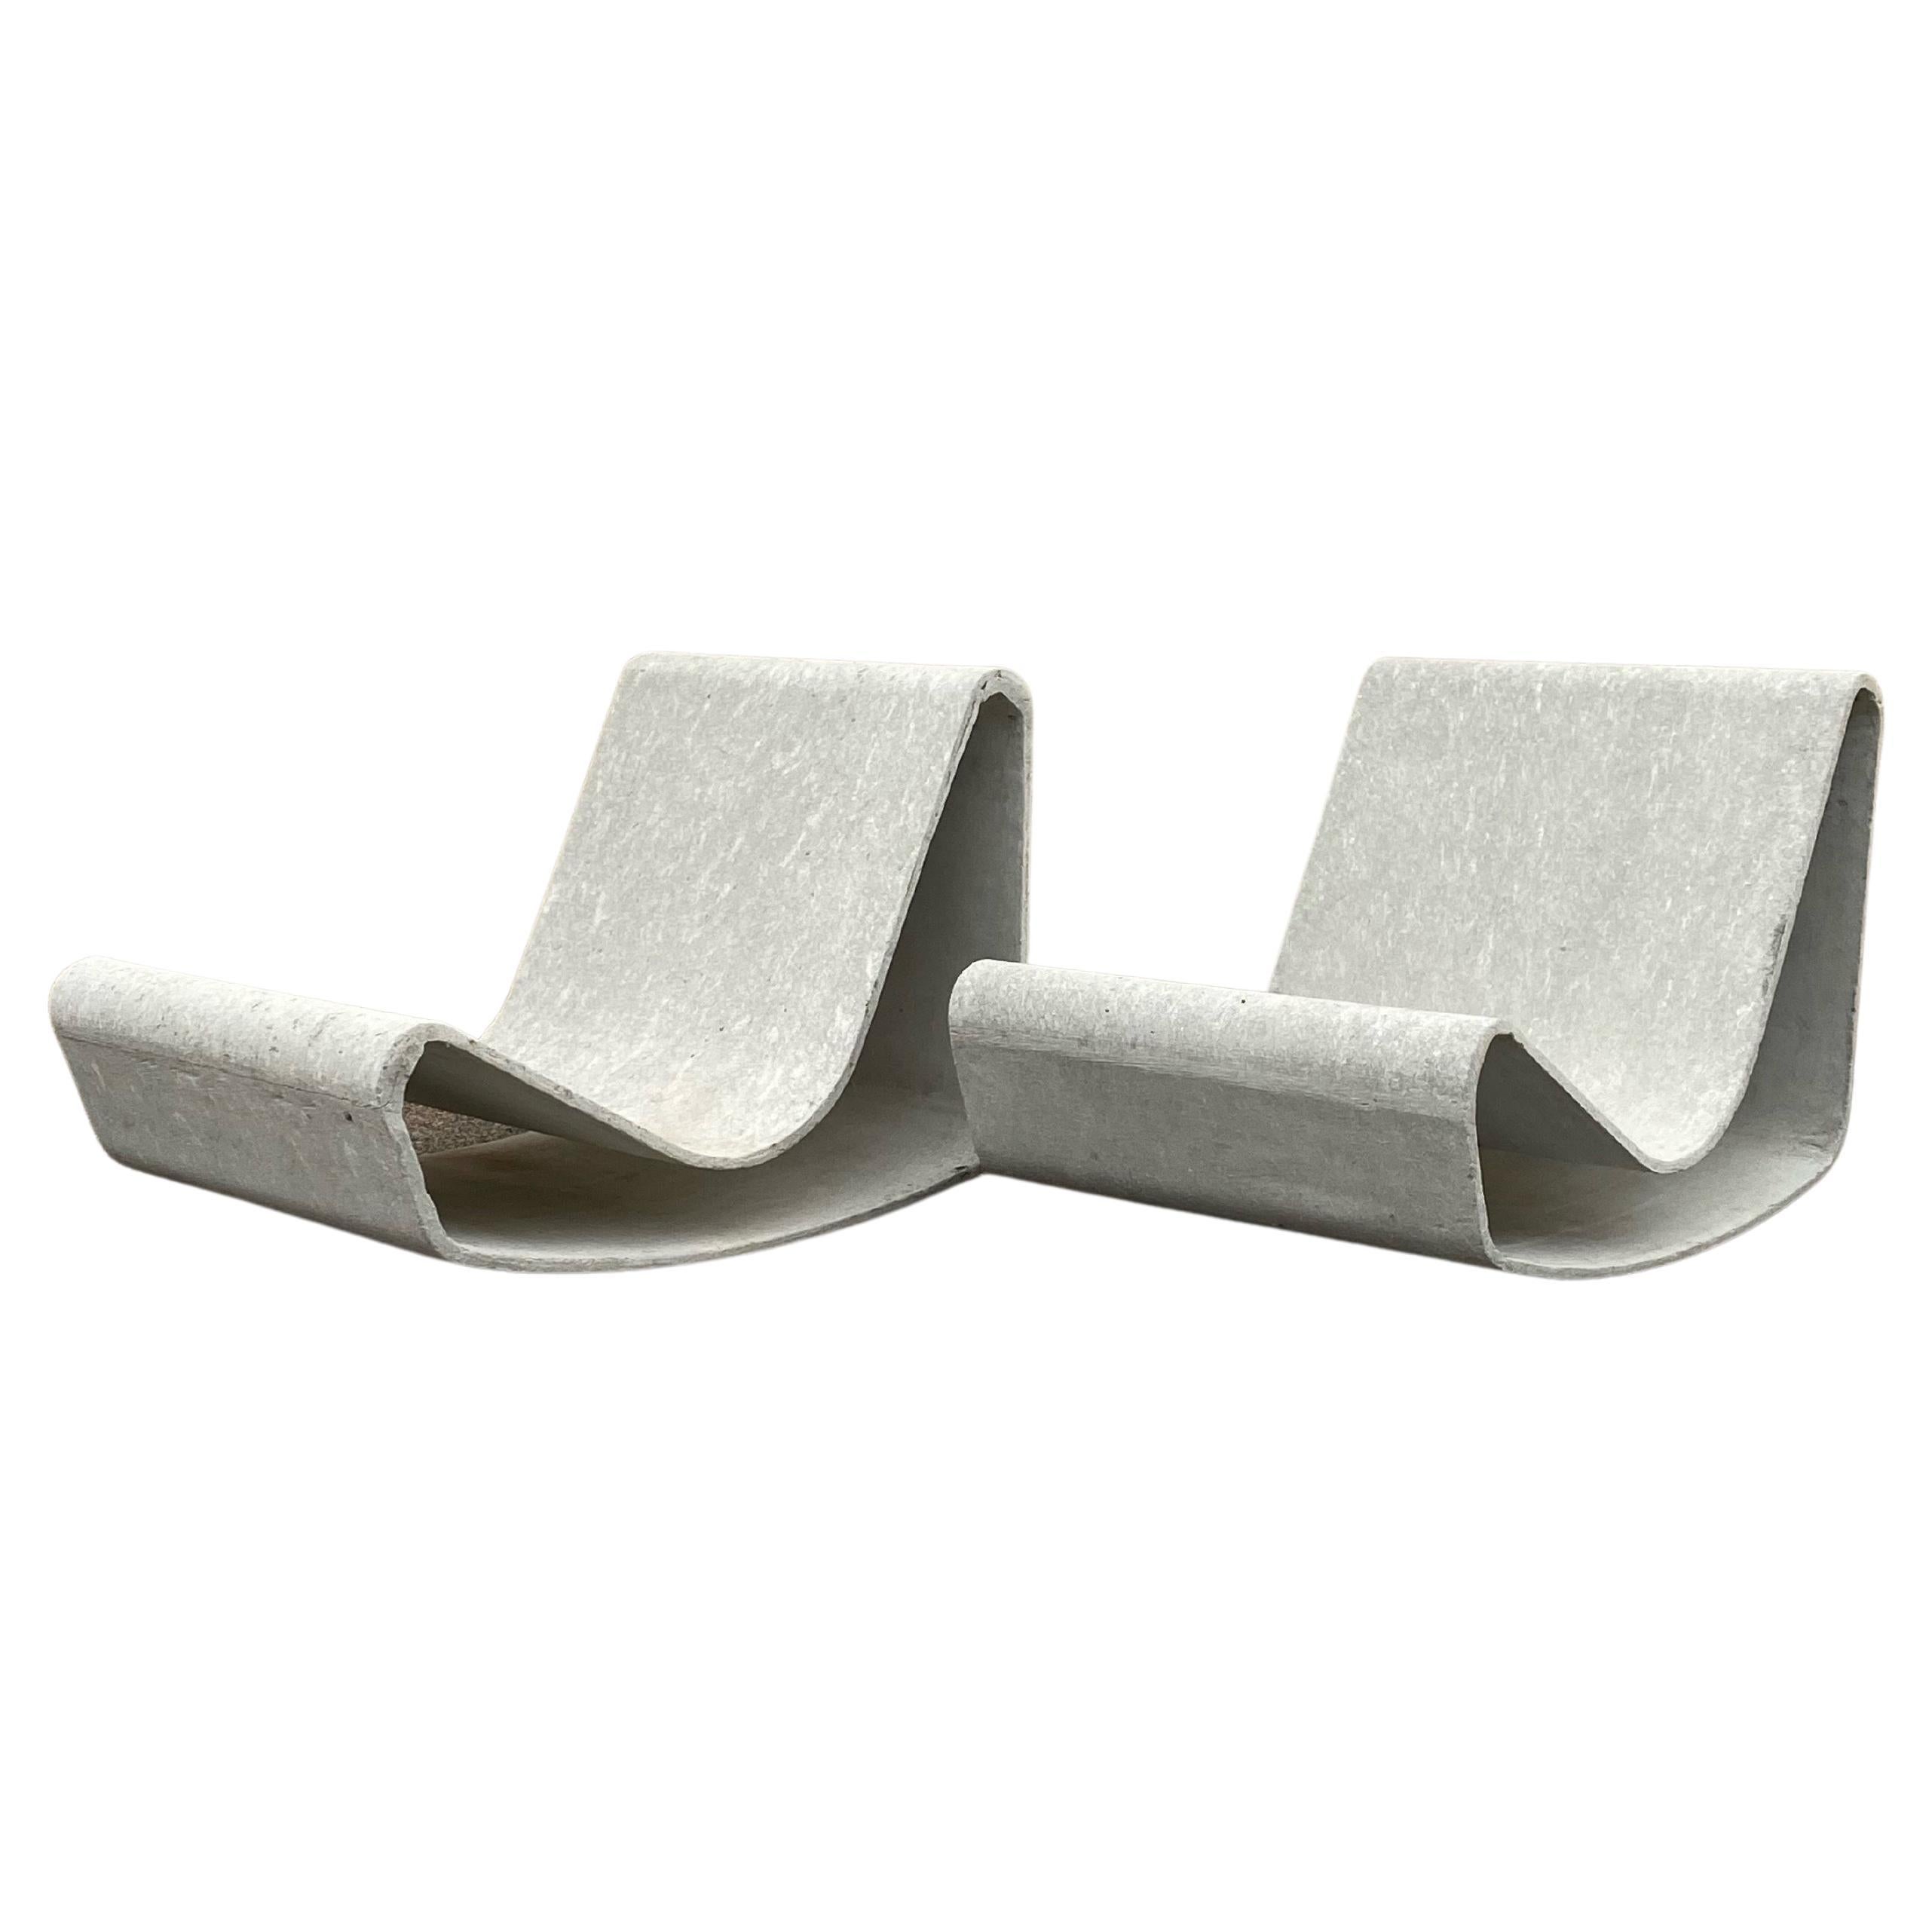 Pair of Concrete Loop Chair Design by Willy Guhl, 1960s For Sale